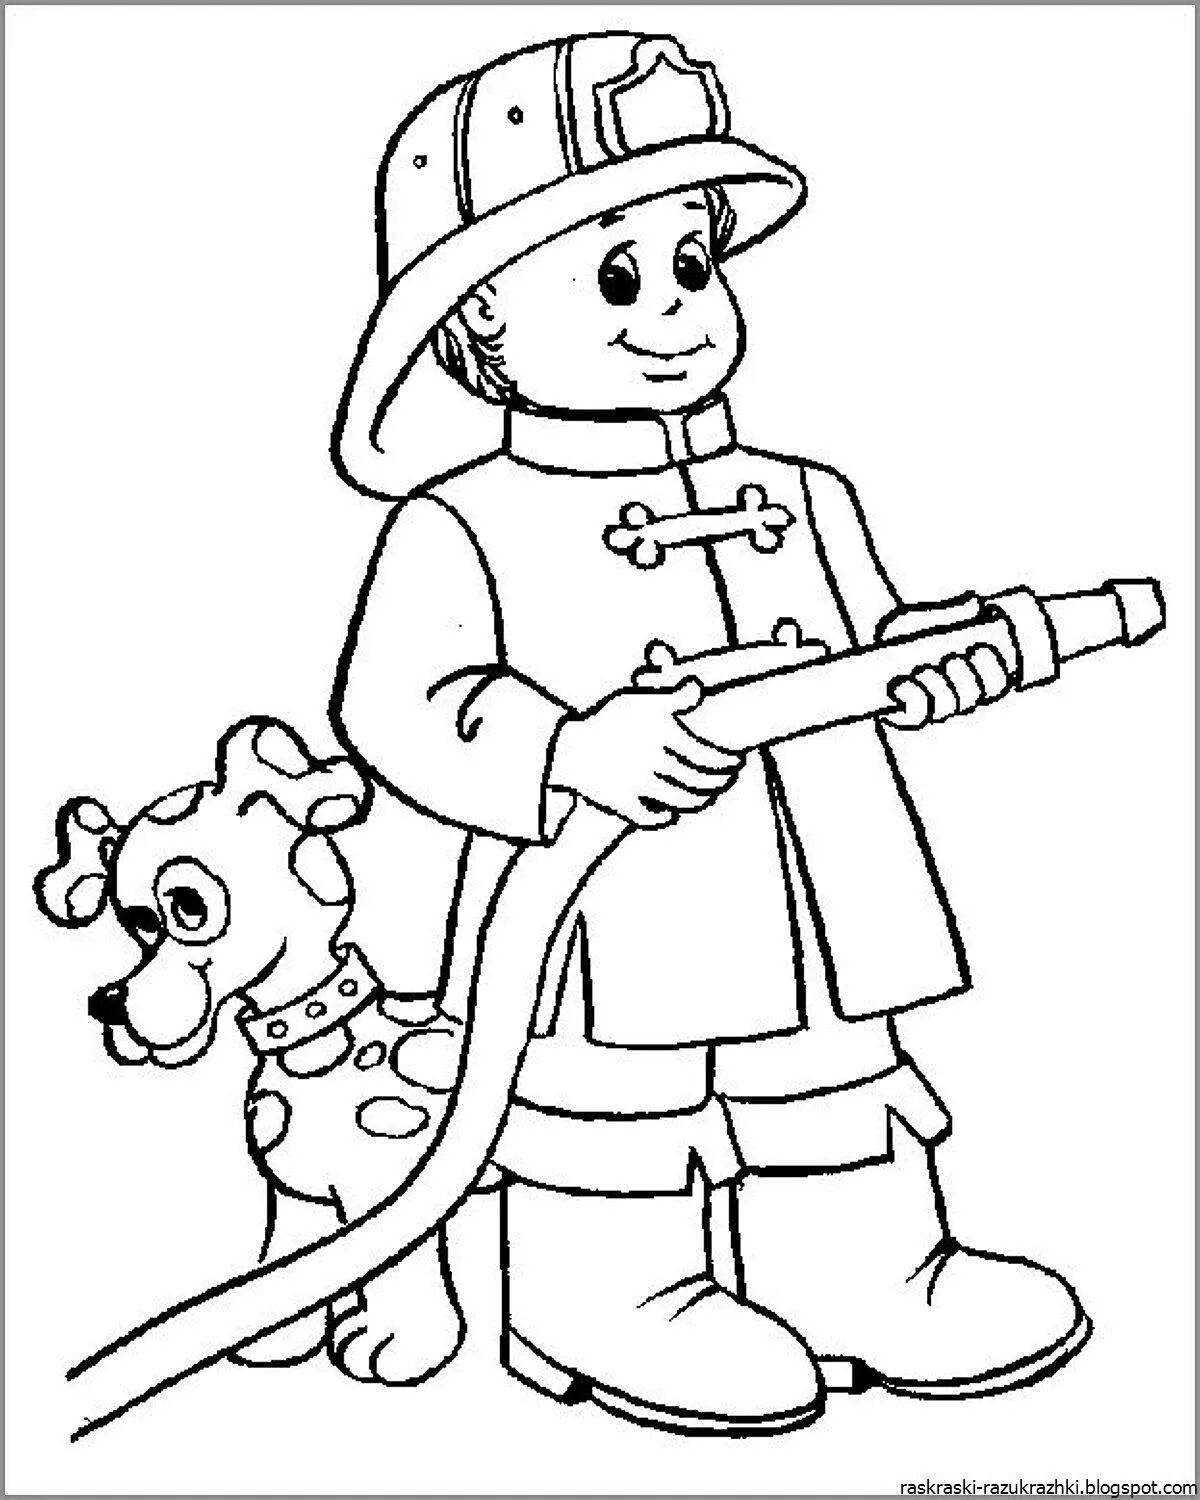 Coloring book amazing firefighter profession